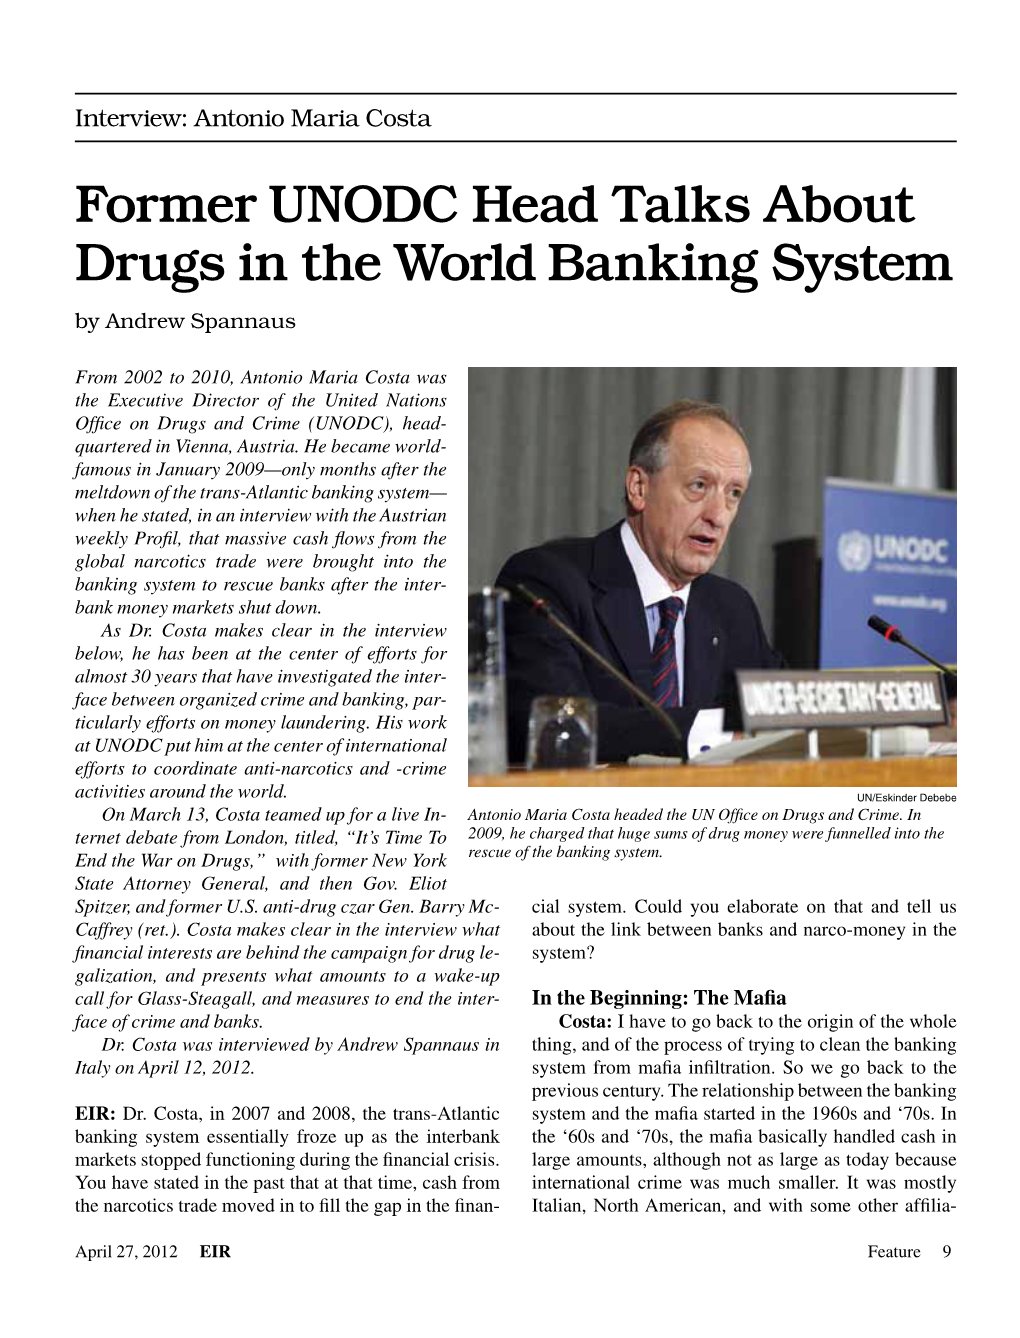 Former UNODC Head Talks About Drugs in the World Banking System by Andrew Spannaus